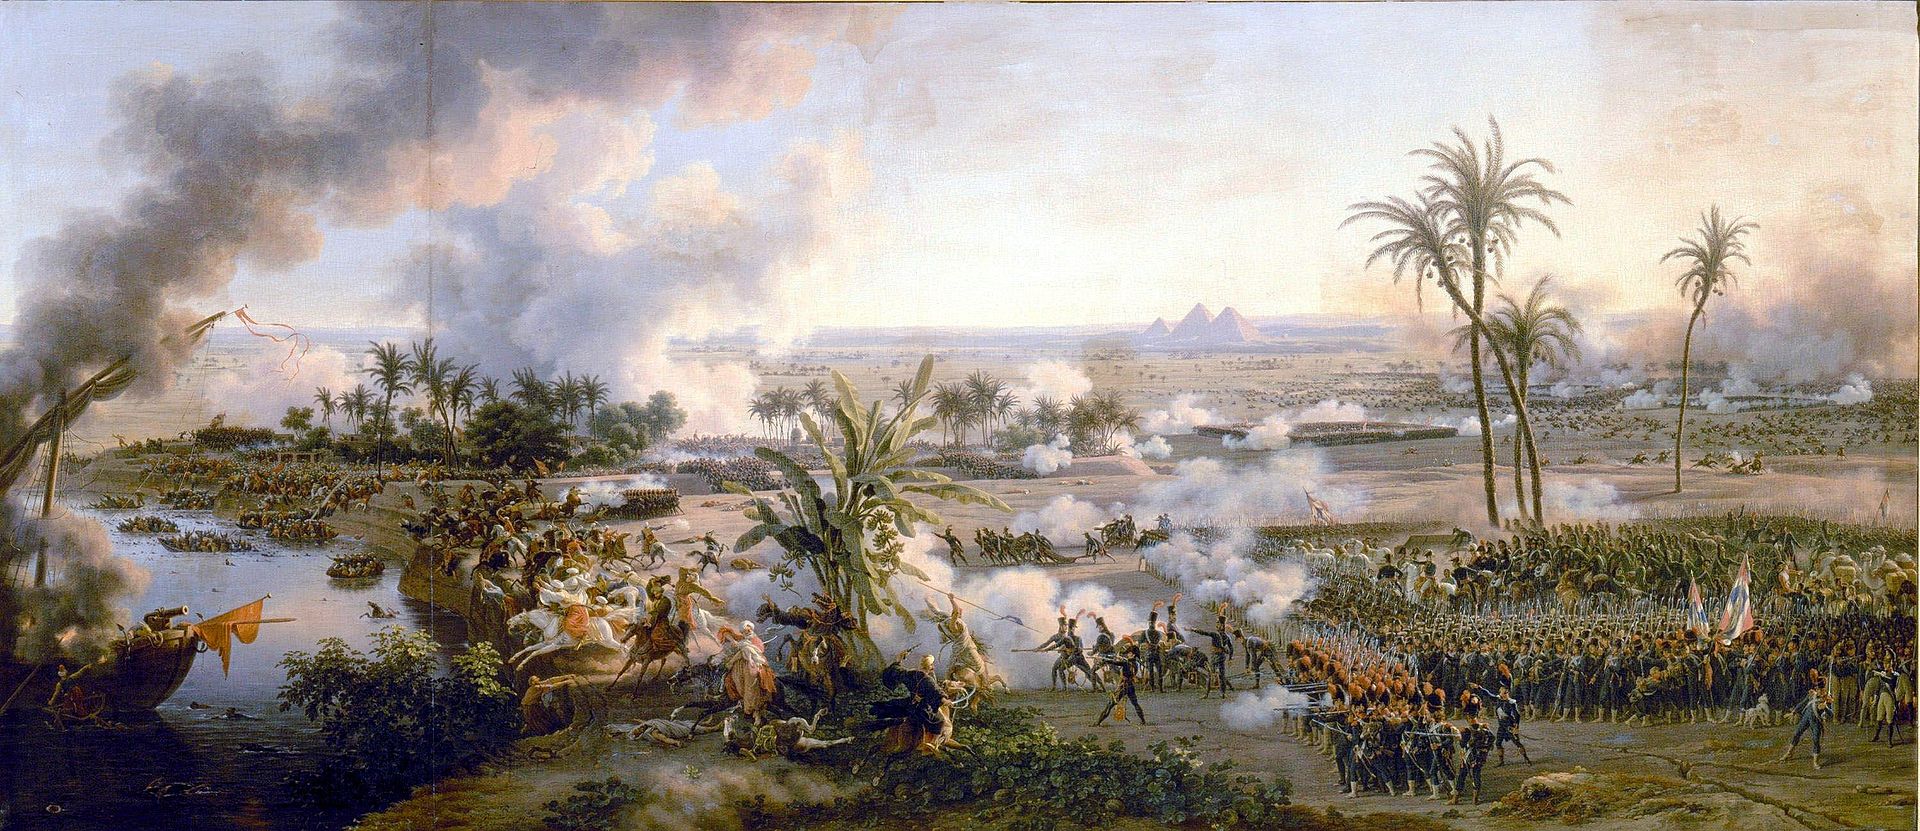 Battle of the Pyramids on 21 July 1798 by Louis-François, Baron Lejeune, 1808